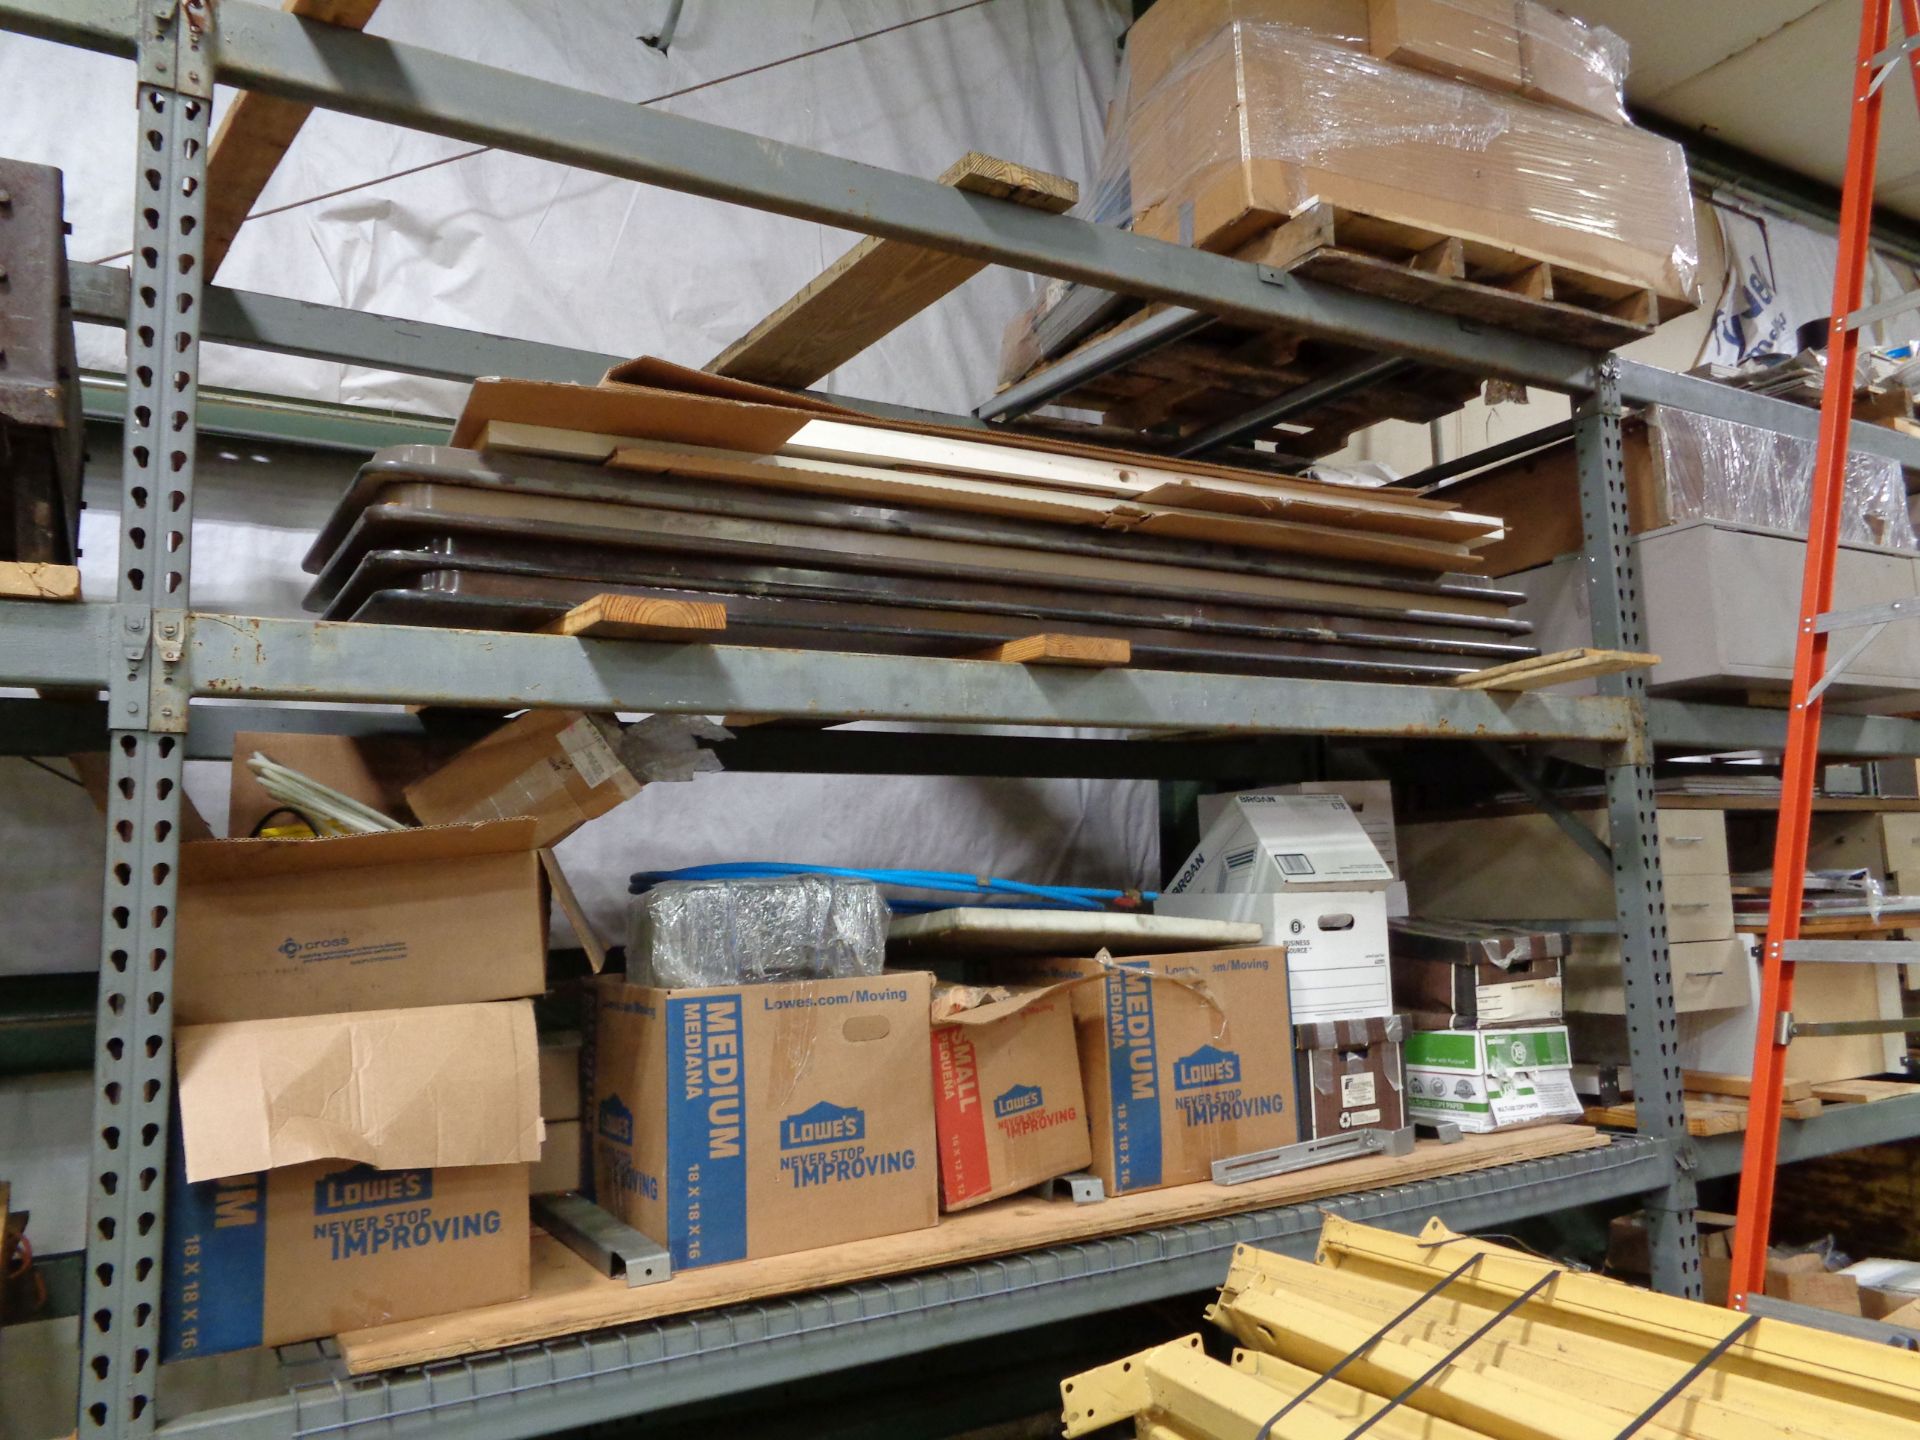 SECTIONS 42" X 108" X 96" HIGH PALLET RACK AND CONTENTS, WITH MISCELLANEOUS OFFICE FURNITURE, - Image 6 of 9